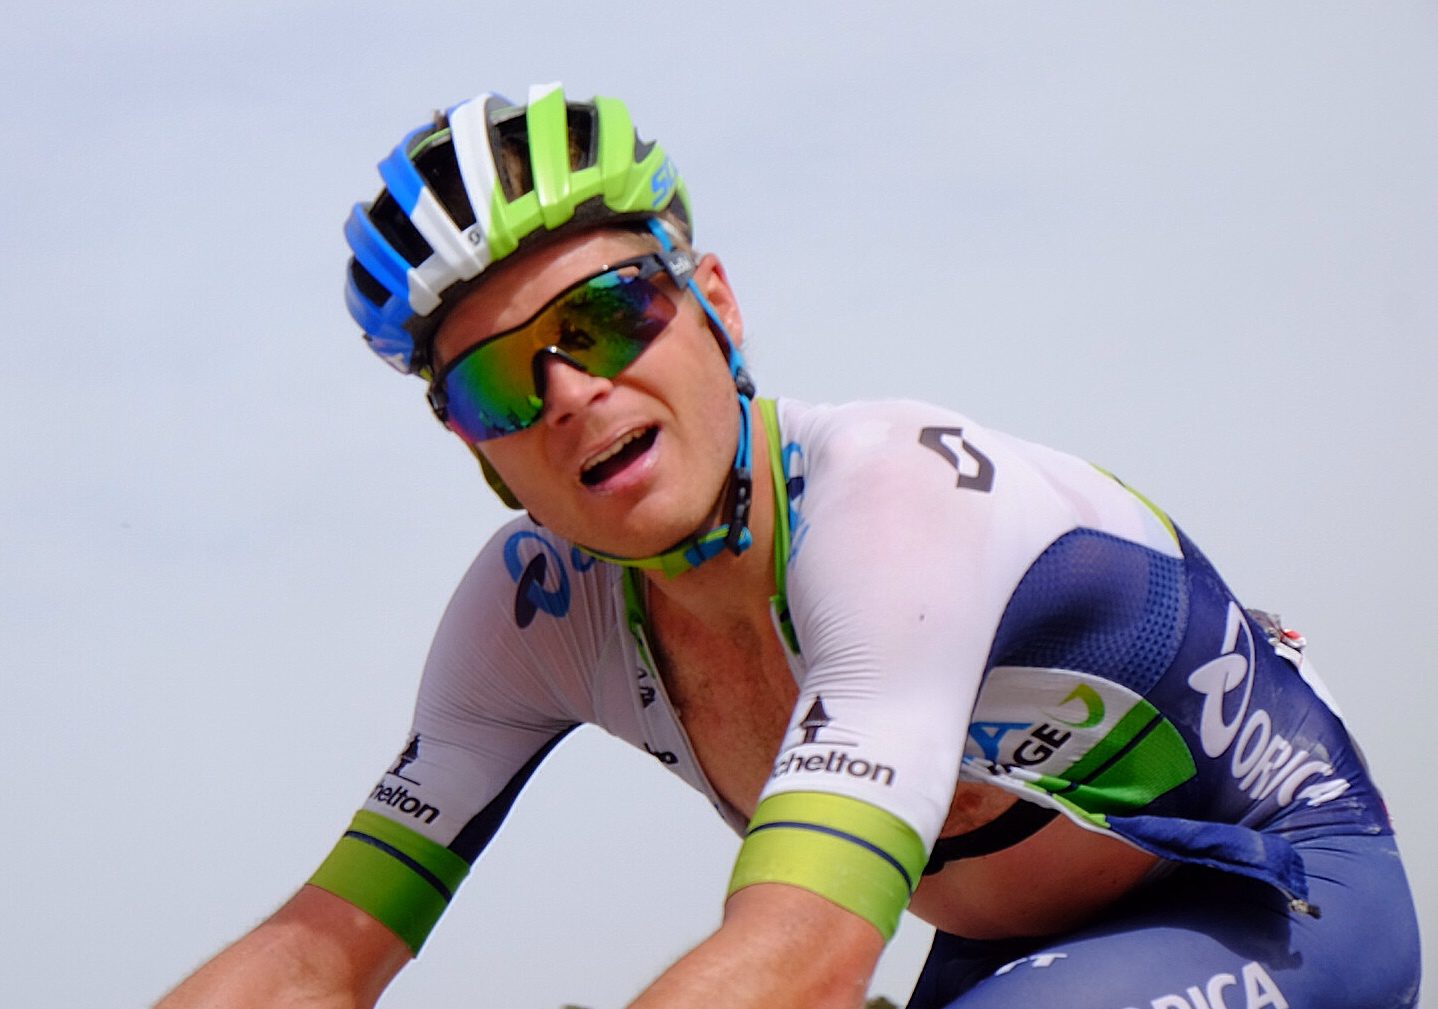 Christian Meier of Orica-GreenEdge rides during Stage 3 of the Tour of Turkey. Photo credit: Steve Thomas